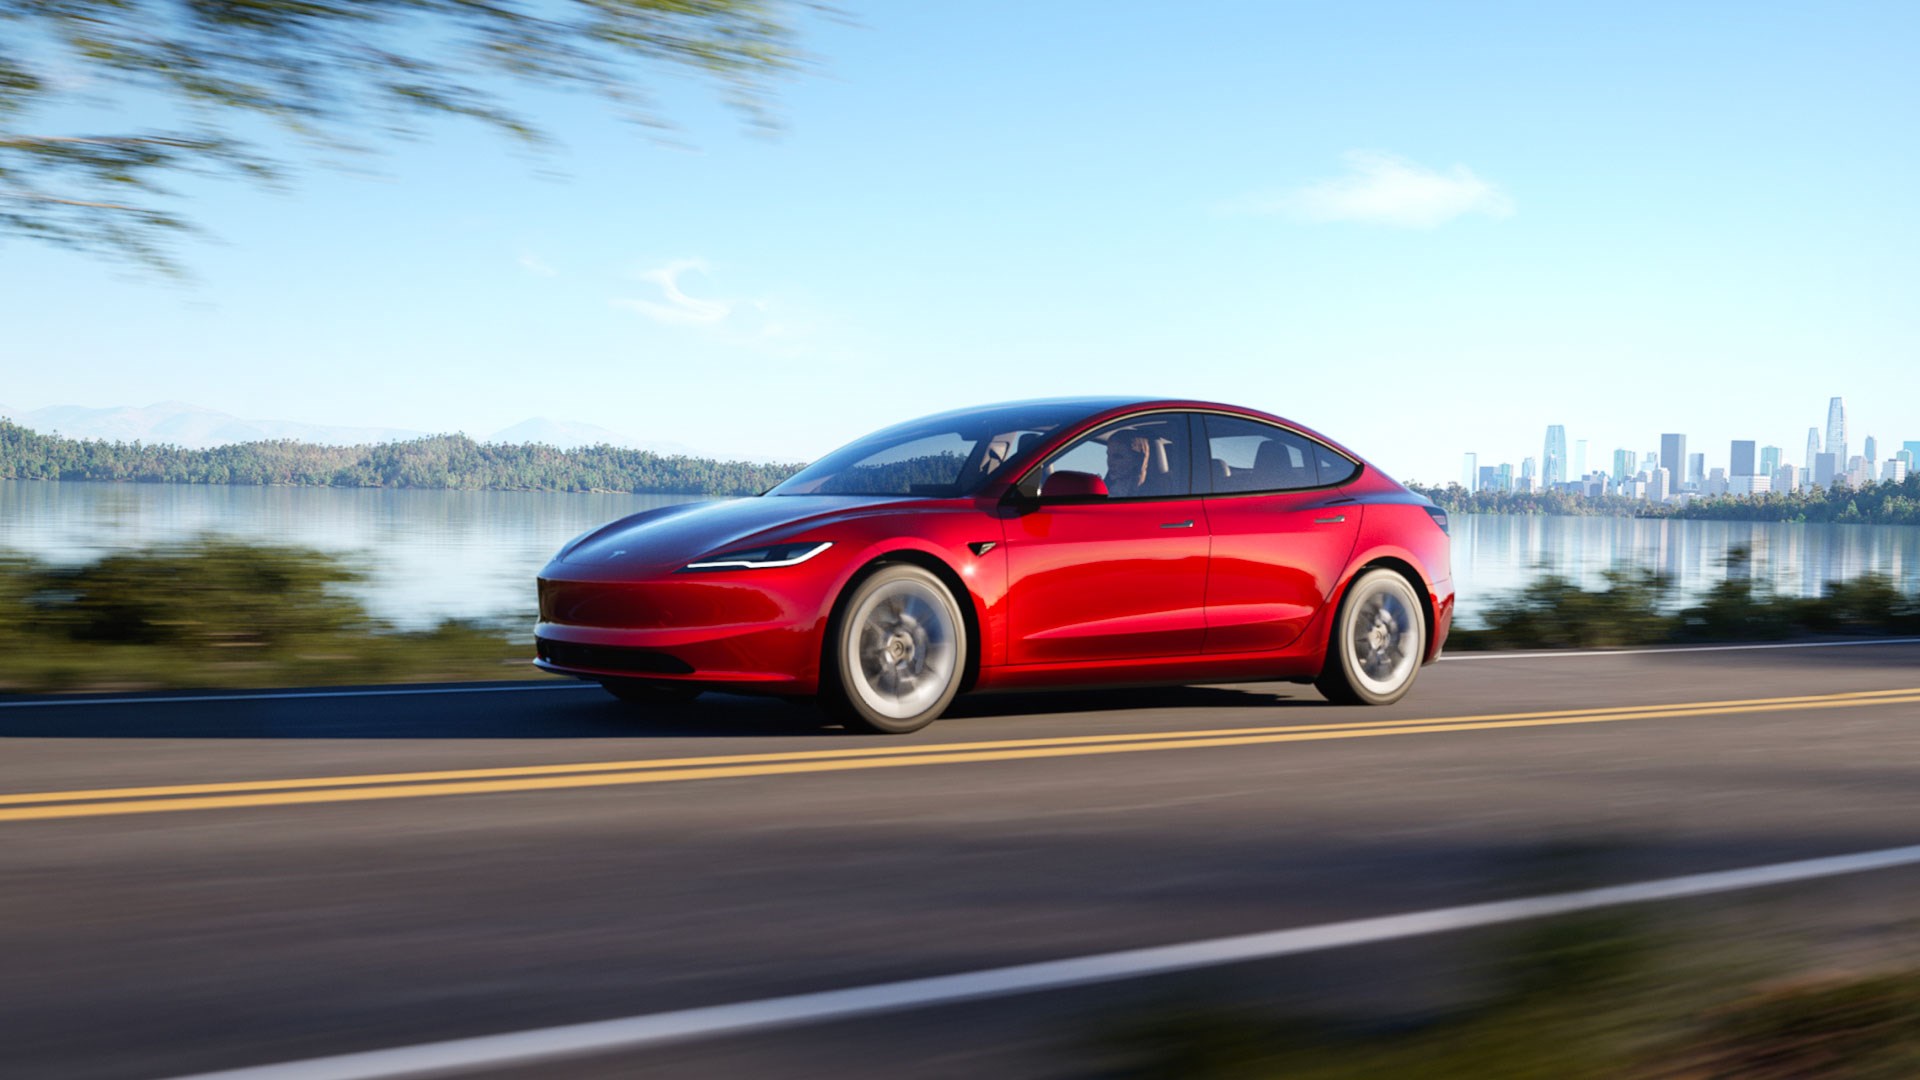 Tesla Model 3 Highland Arrives In The US: Here's What's Changed